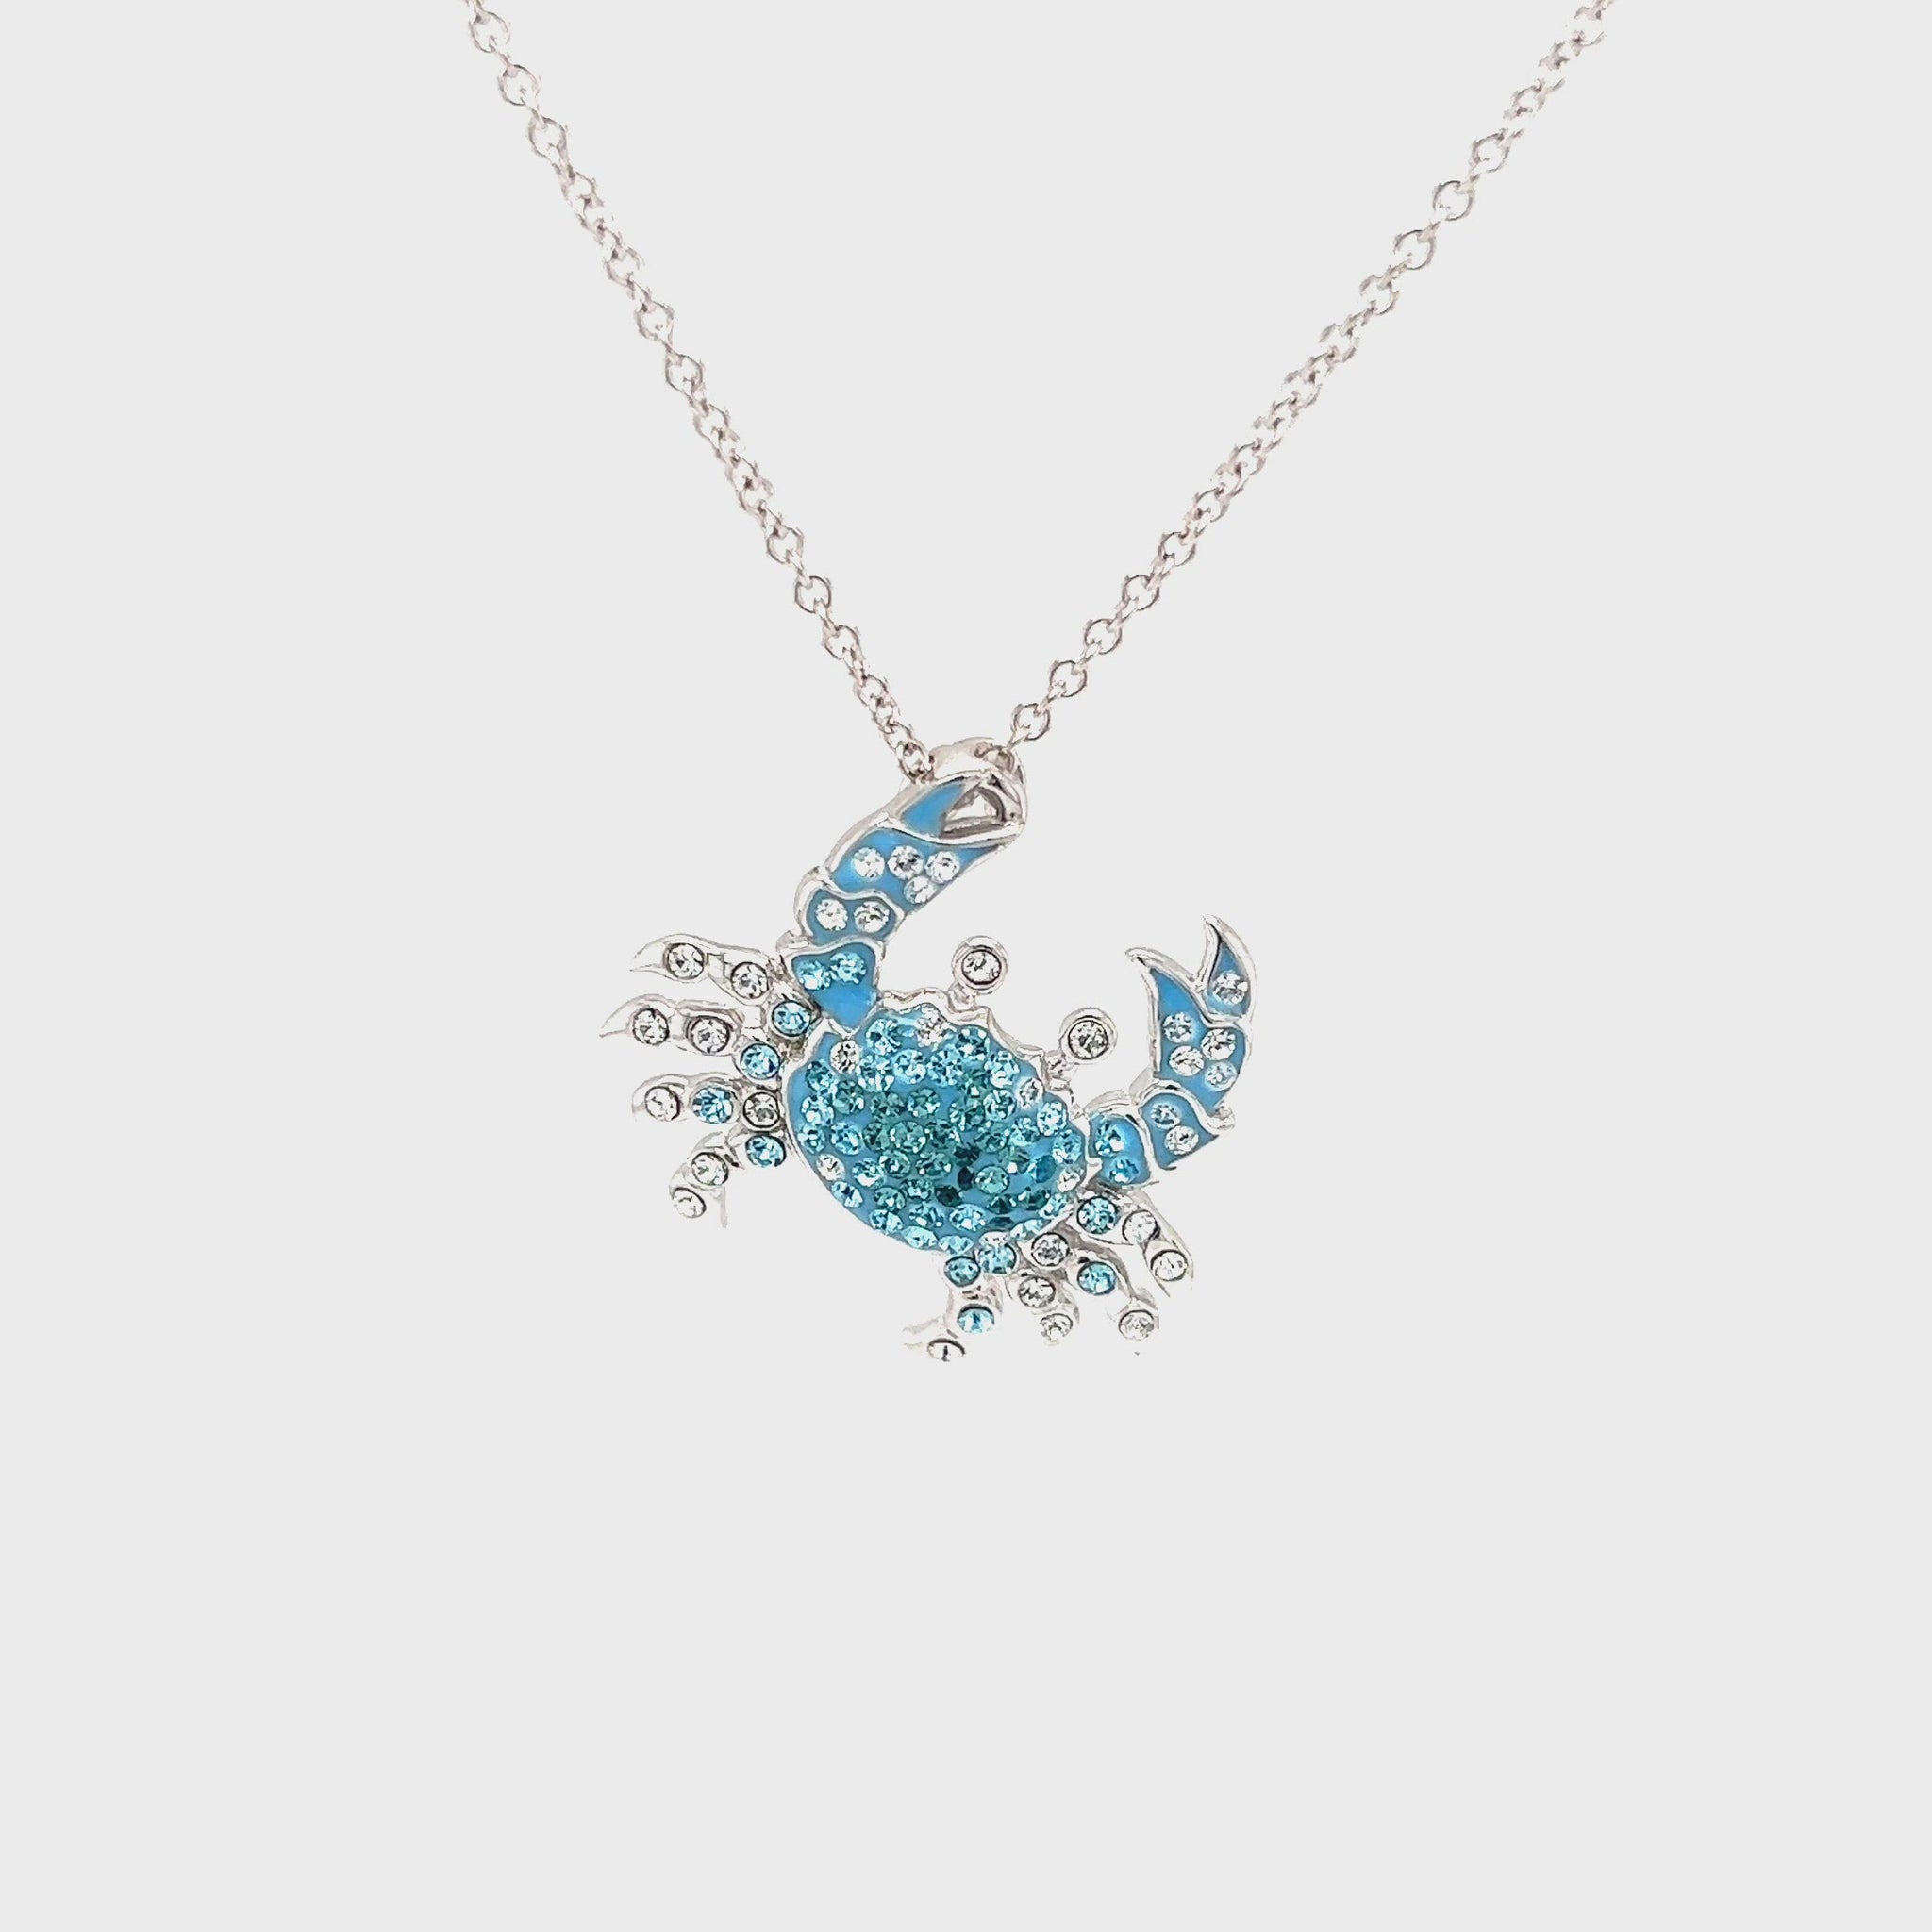 Blue Crab Necklace with Aqua and White Crystals in Sterling Silver Video